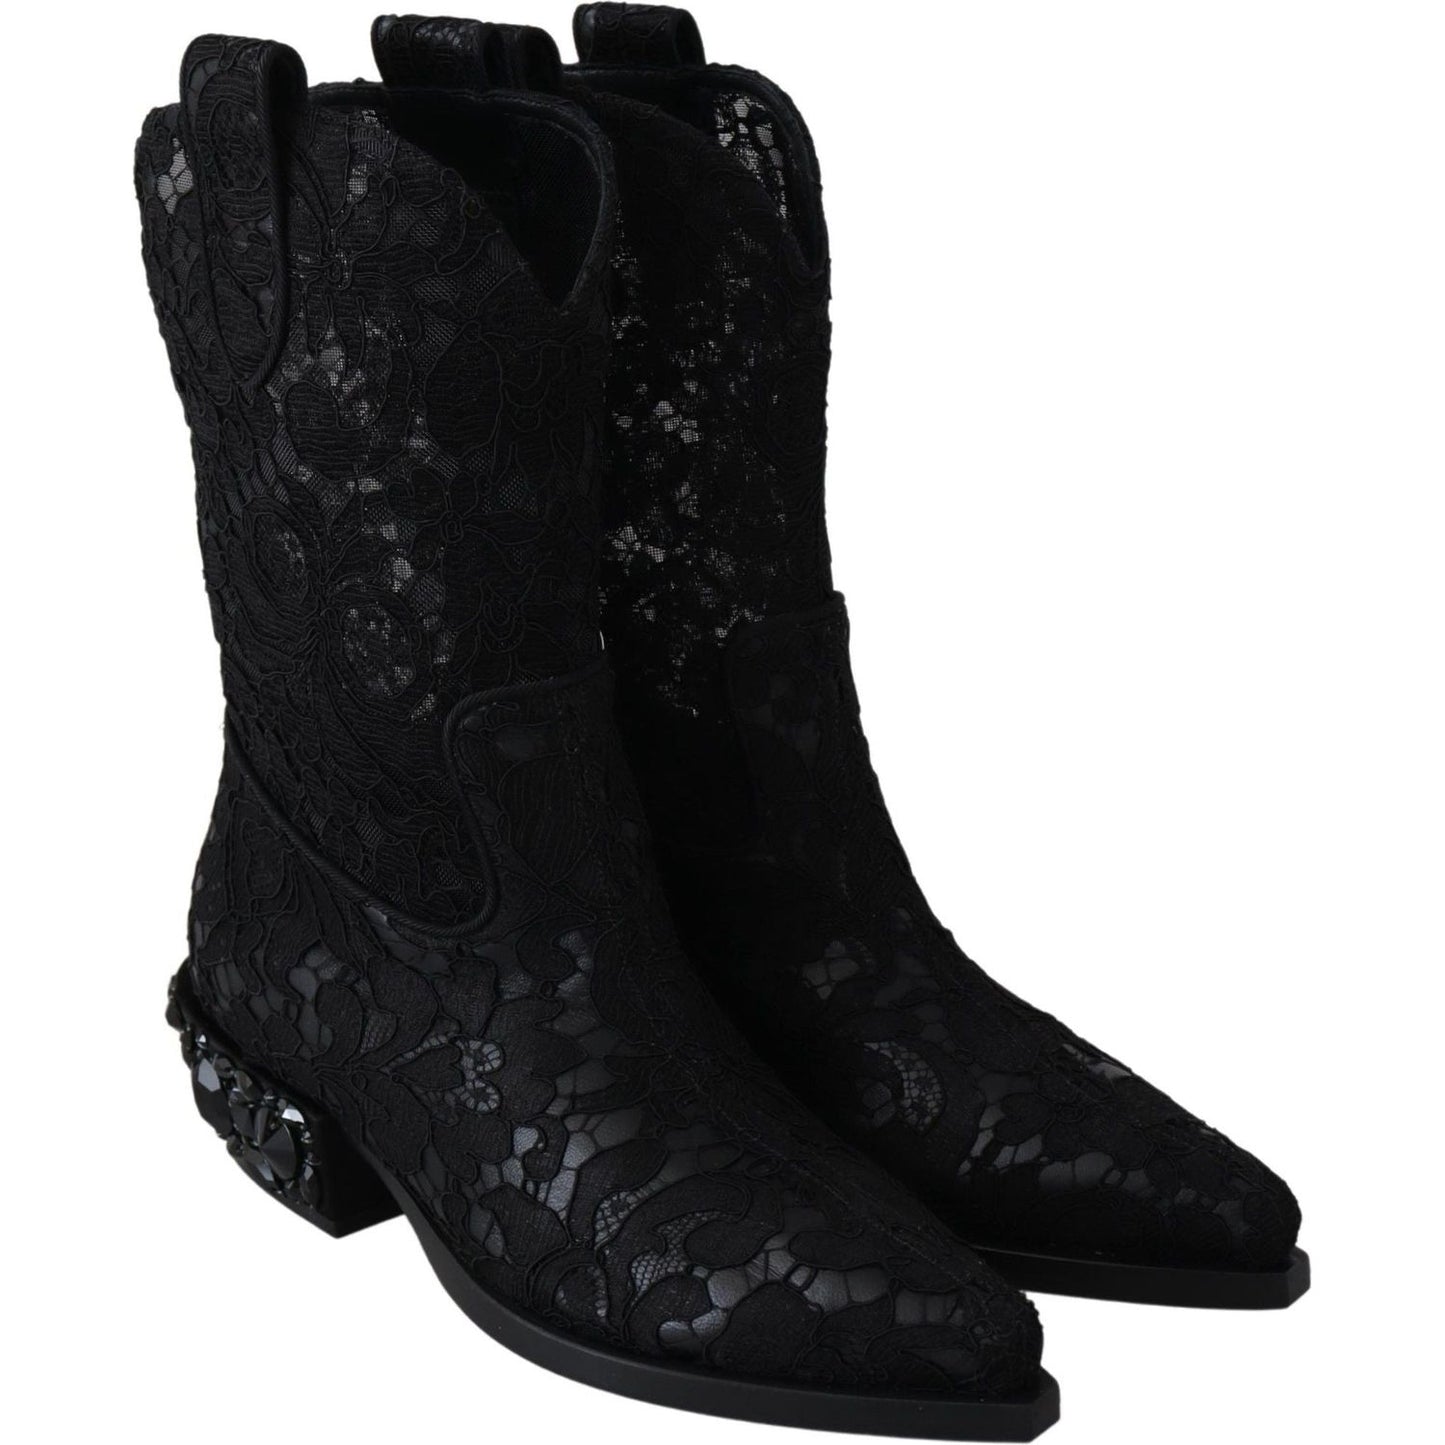 Dolce & Gabbana Elegant Viscose Leather Ankle Boots with Crystals black-lace-taormina-ankle-cowboy-crystal-shoes